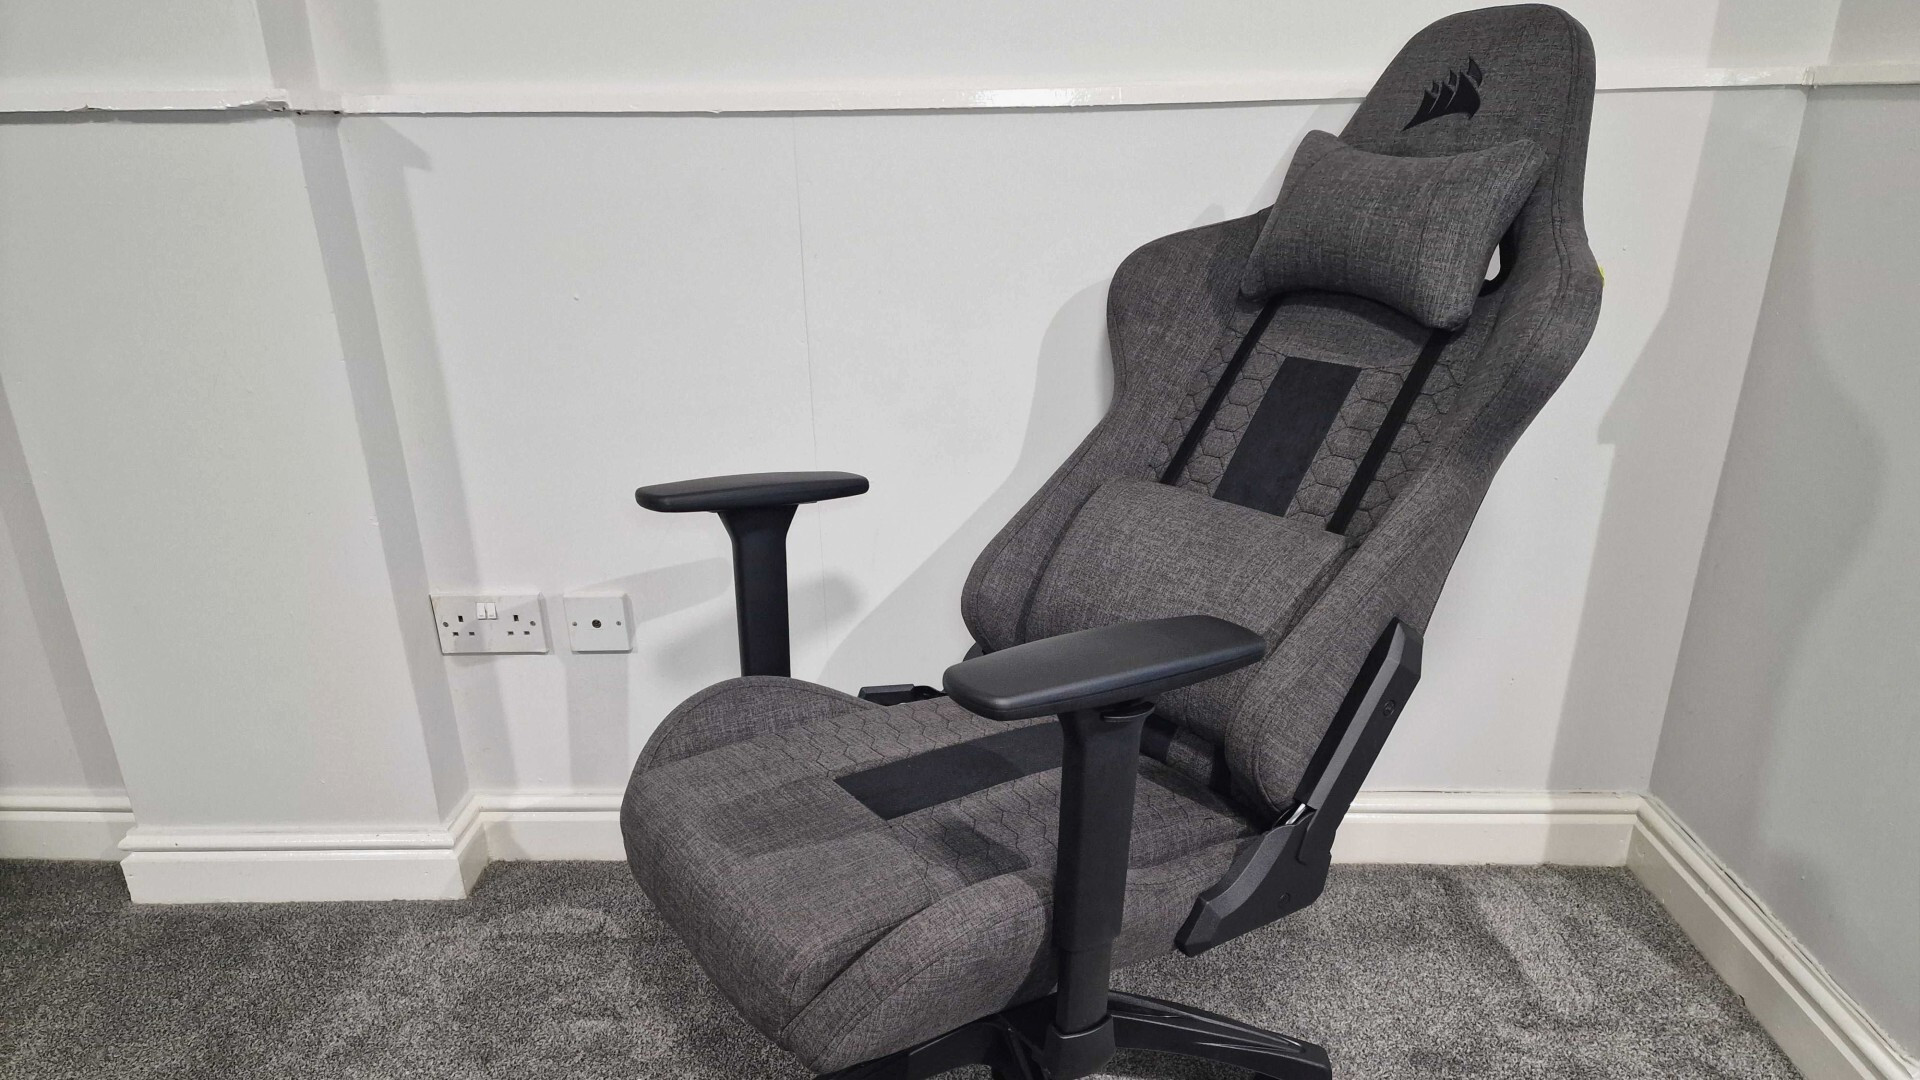 Corsair TC100 Relaxed review: A gaming chair, the backrest is reclining at an acute angle